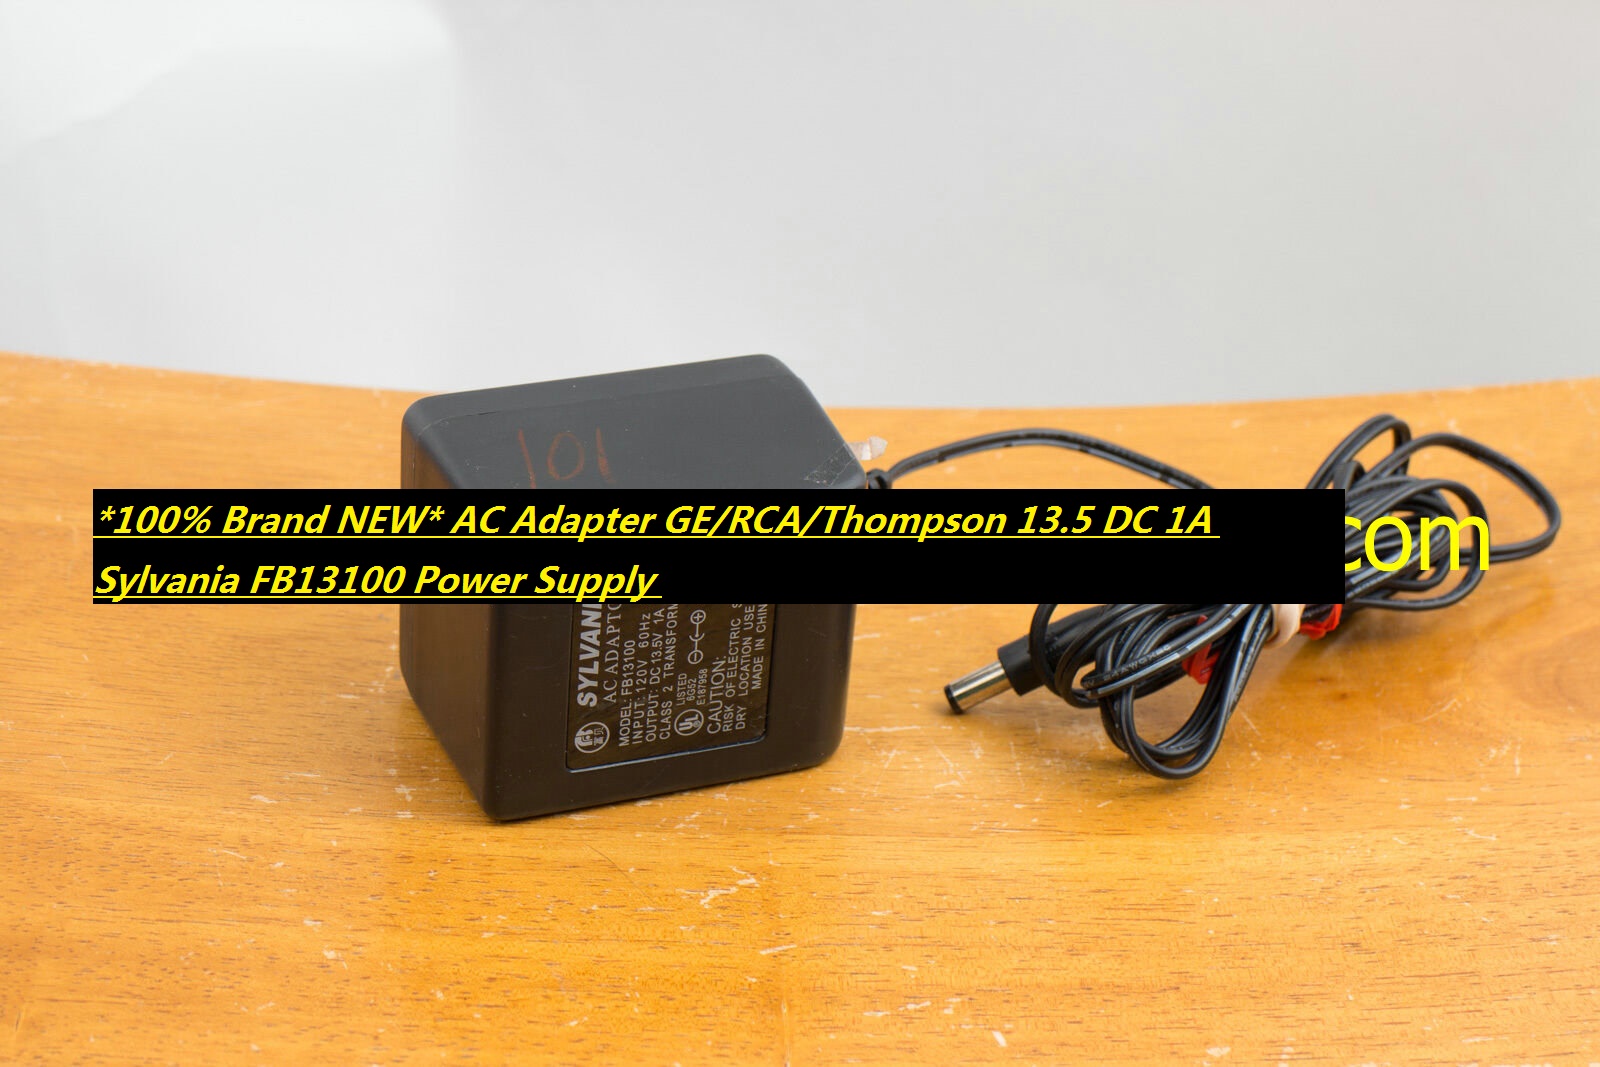 *100% Brand NEW* AC Adapter GE/RCA/Thompson 13.5 DC 1A Sylvania FB13100 Power Supply - Click Image to Close